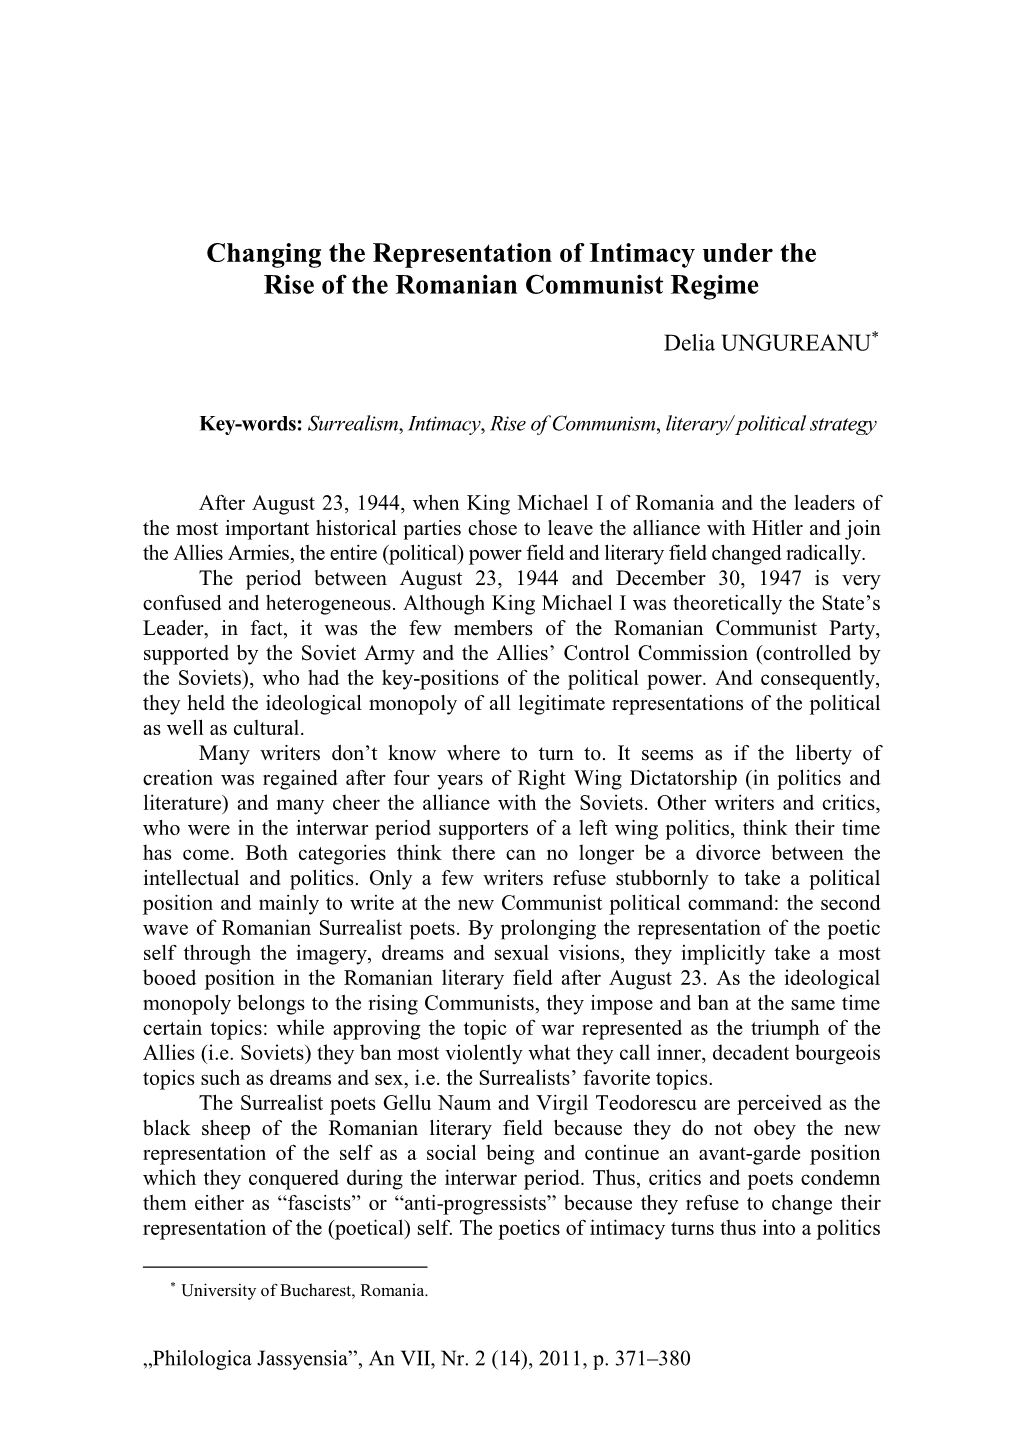 Changing the Representation of Intimacy Under the Rise of the Romanian Communist Regime